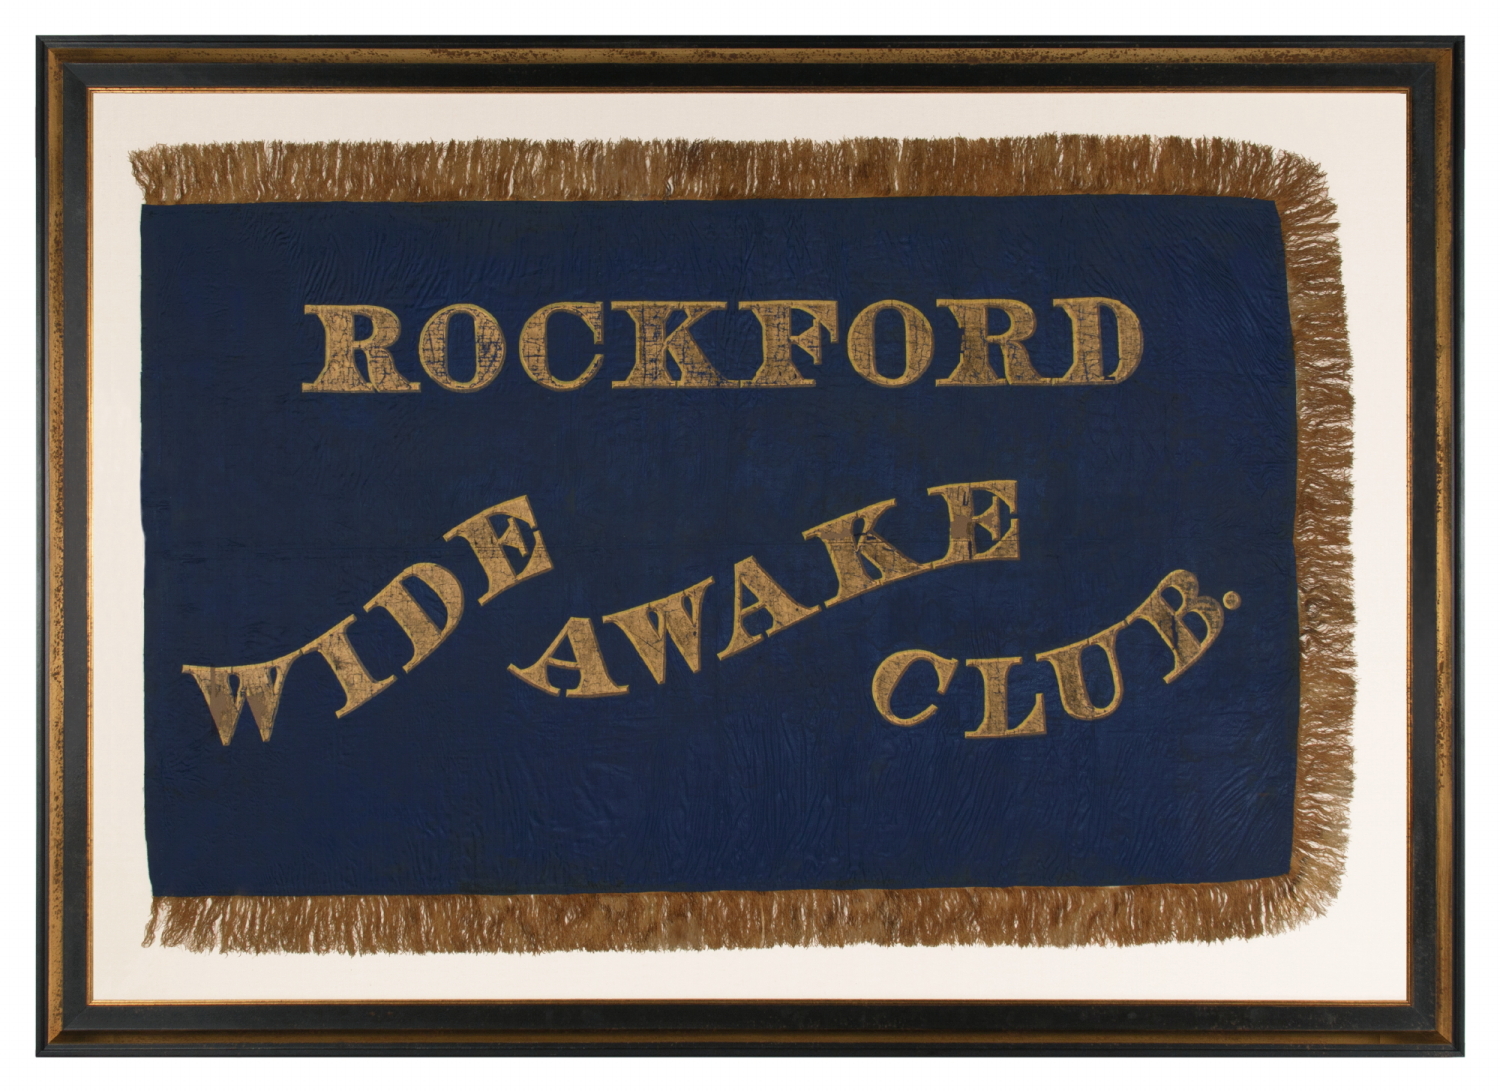 EXTRAORDINARY SILK FLAG, COMMISSIONED BY OR PRESENTED TO THE ROCKFORD, ILLINOIS “WIDE AWAKES,” IN SUPPORT OF THE 1860 PRESIDENTIAL CAMPAIGN OF ABRAHAM LINCOLN & HANNIBAL HAMLIN, POSSIBLY CARRIED AT THE OPENING OF THE CIVIL WAR BY COMPANY D OF THE 11TH ILLINOIS INFANTRY